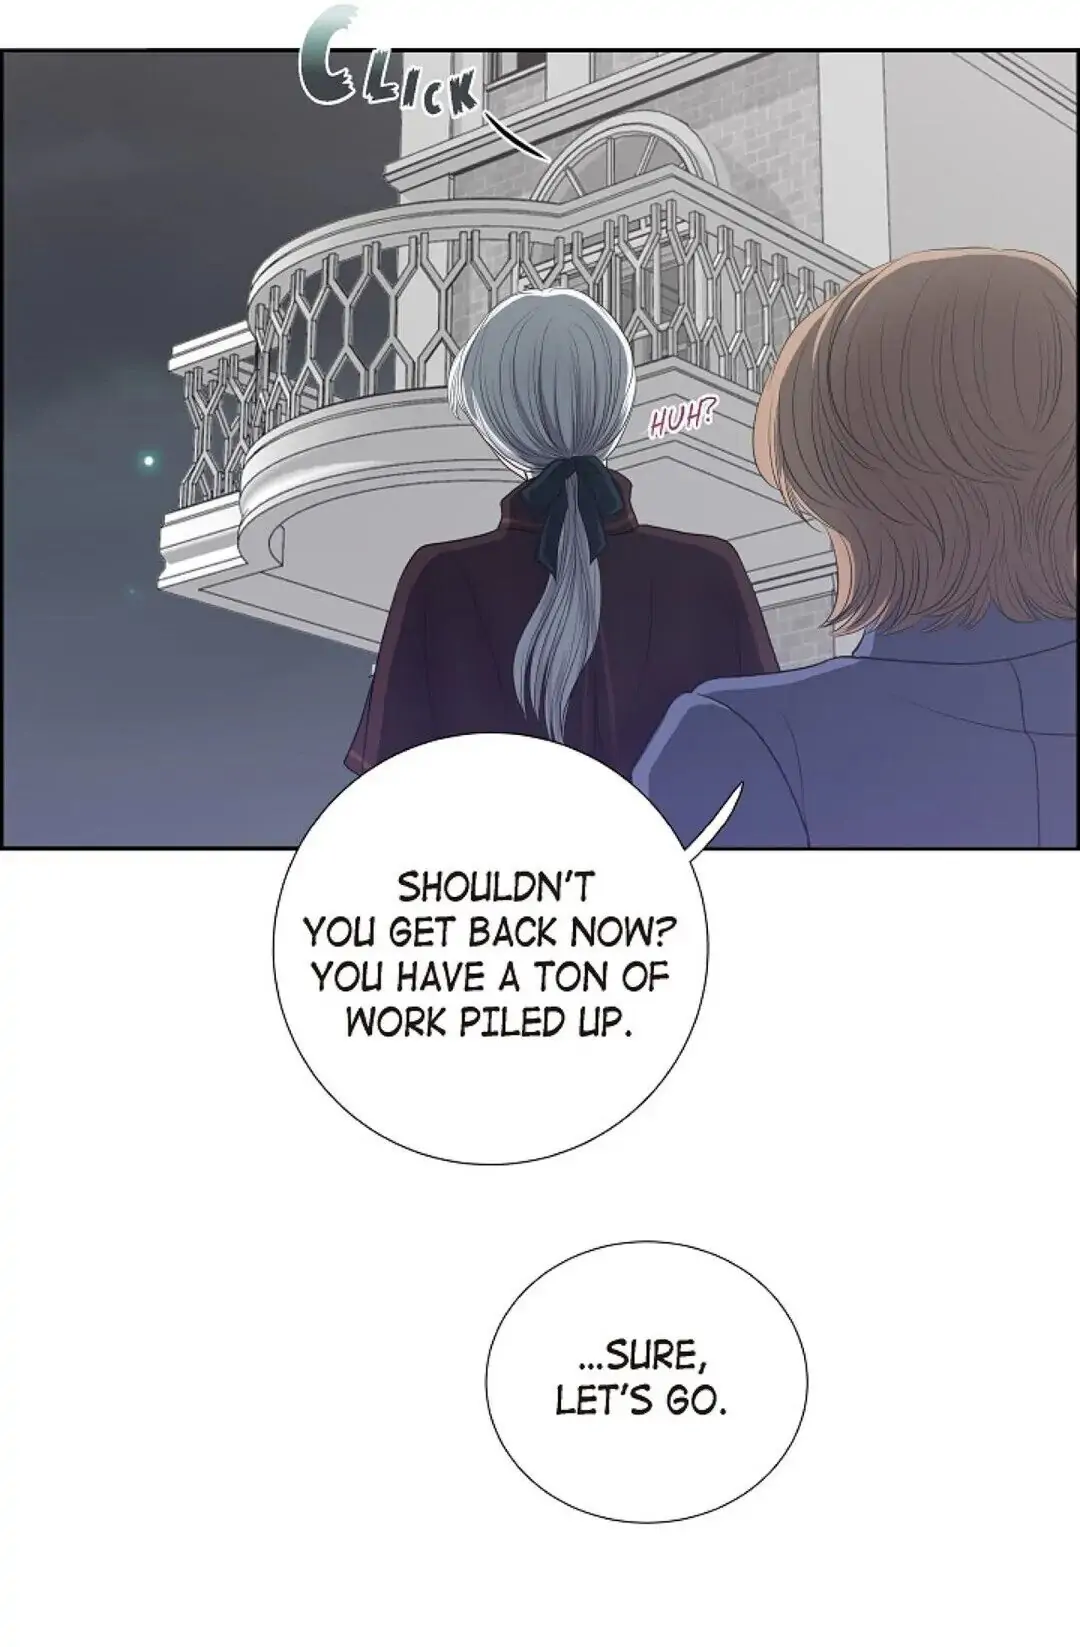 On The Emperor’s Lap chapter 8